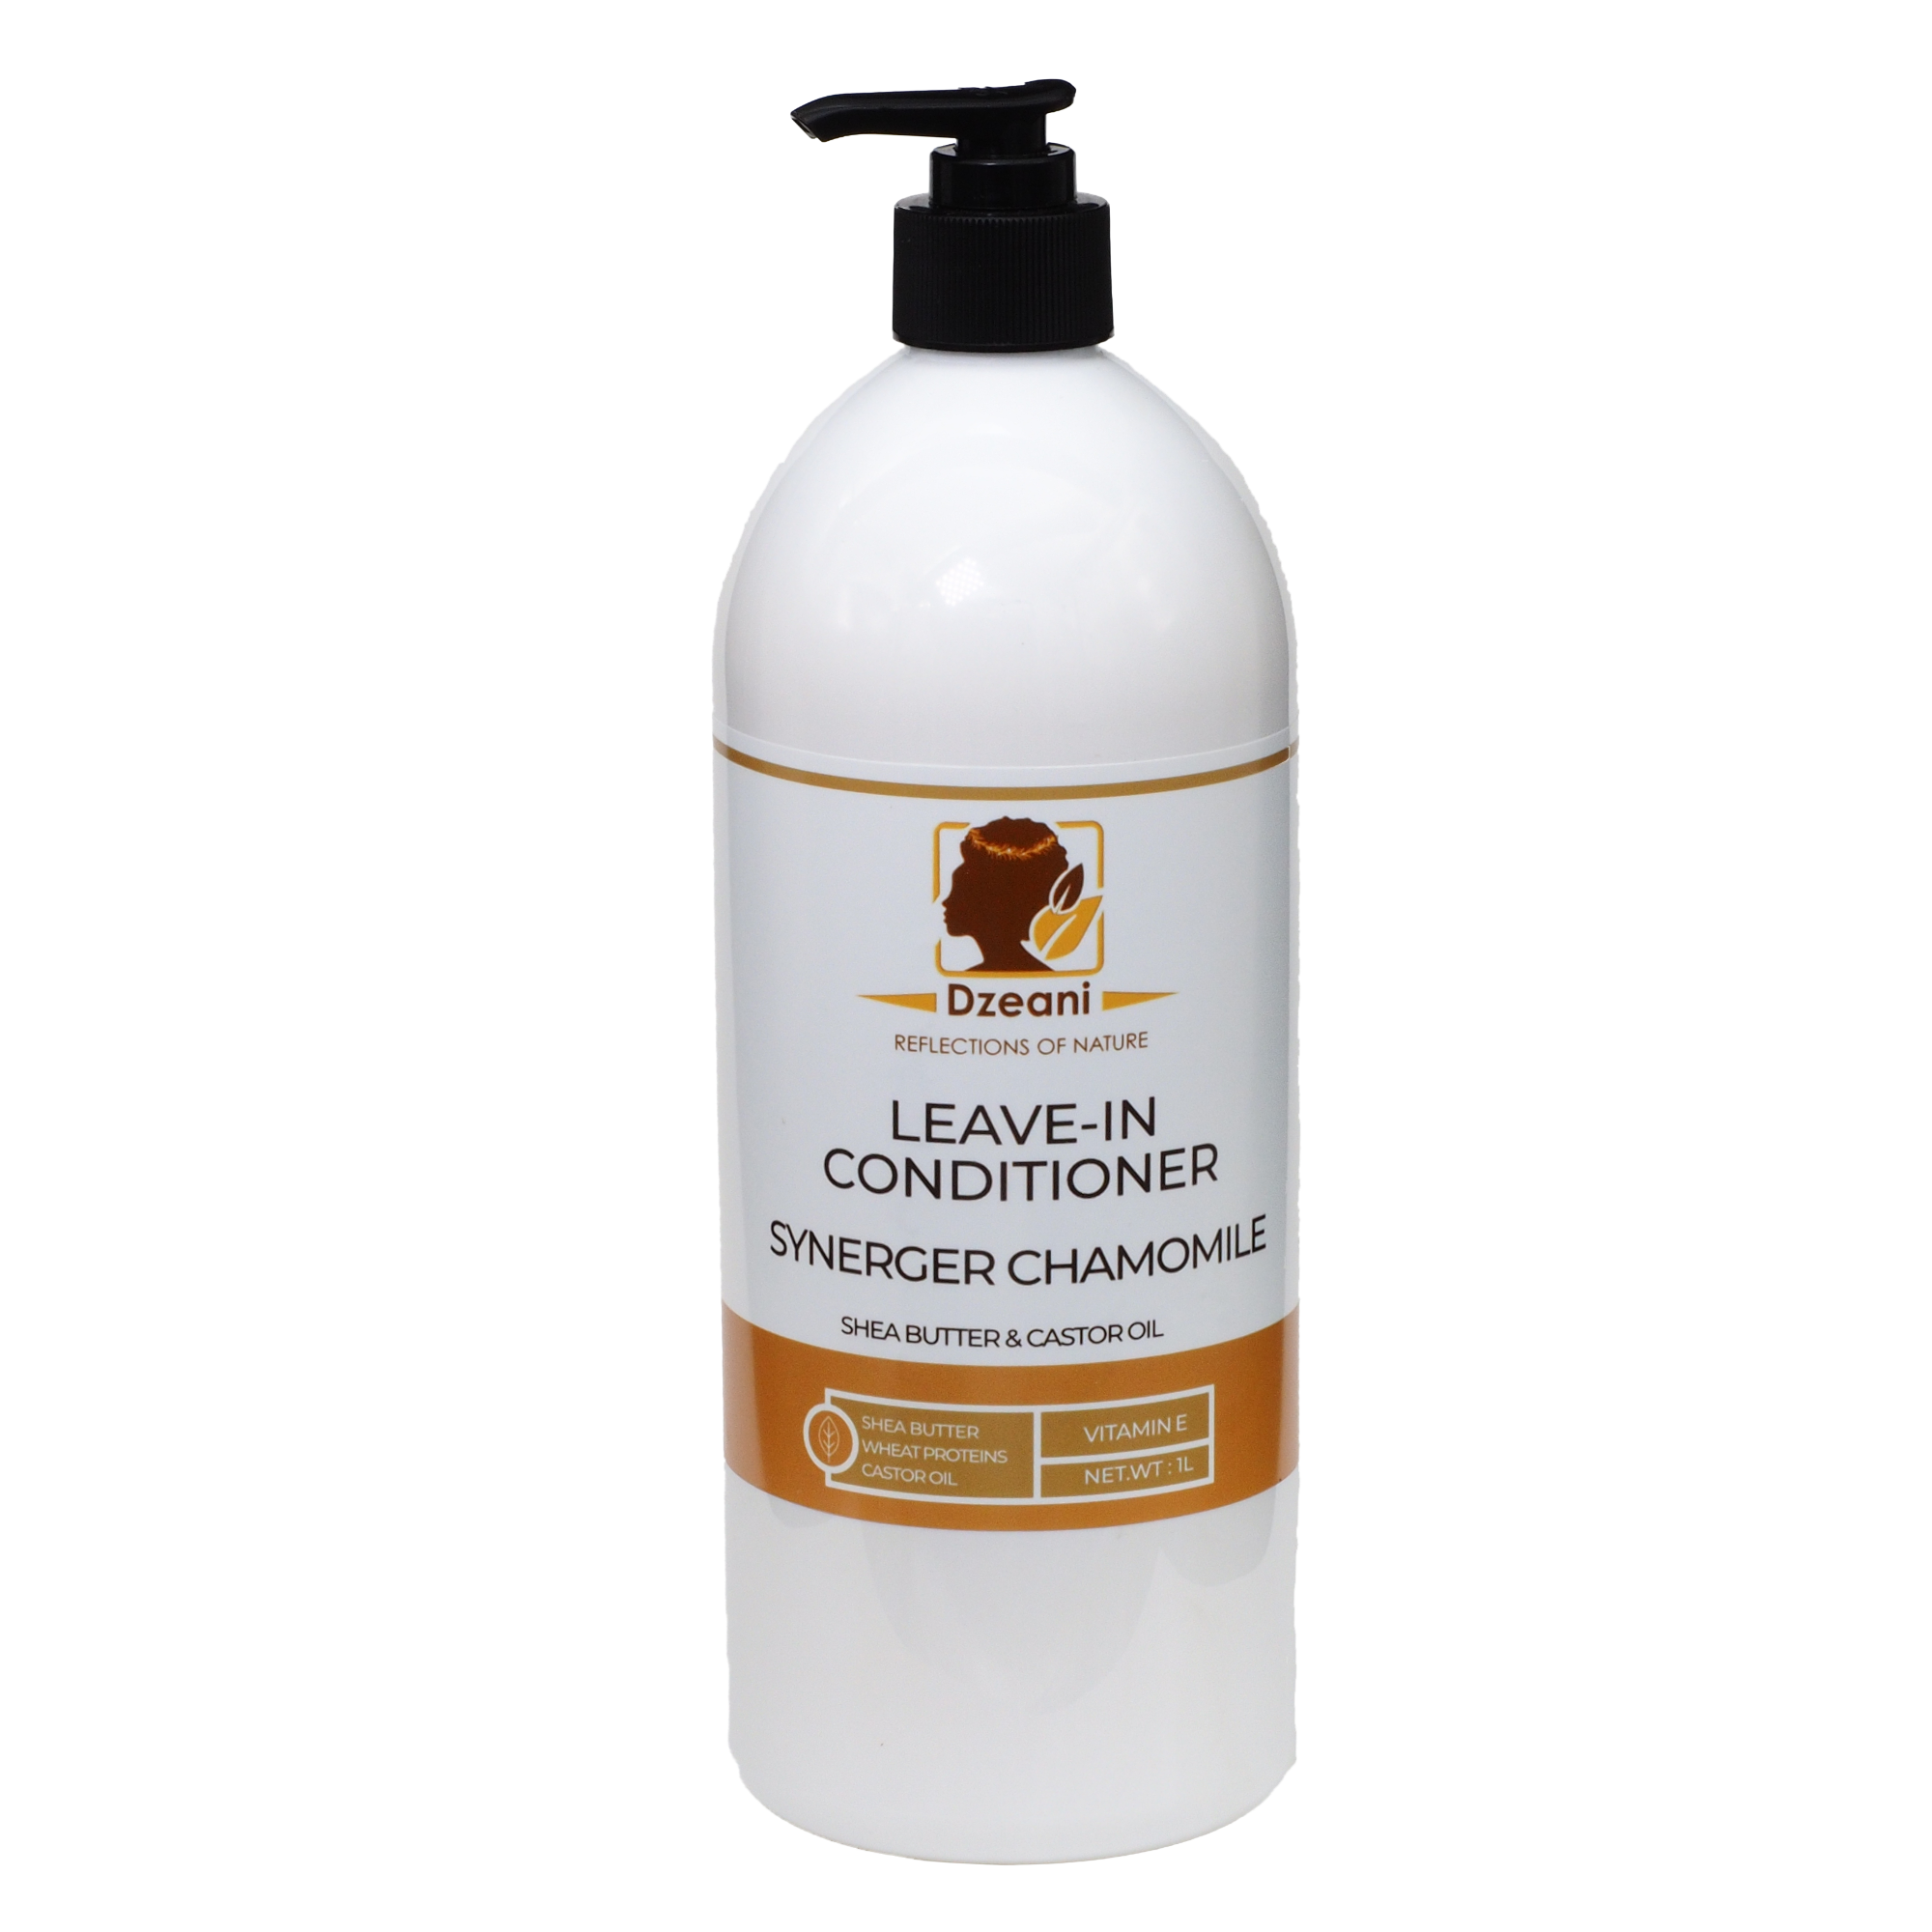 Conditioner is rich in moisturising Shea Butter, Castor Oil and Hydrolyzed Wheat Protein to help nourish, strengthen and repair dry and damaged hair - Dzeani - 